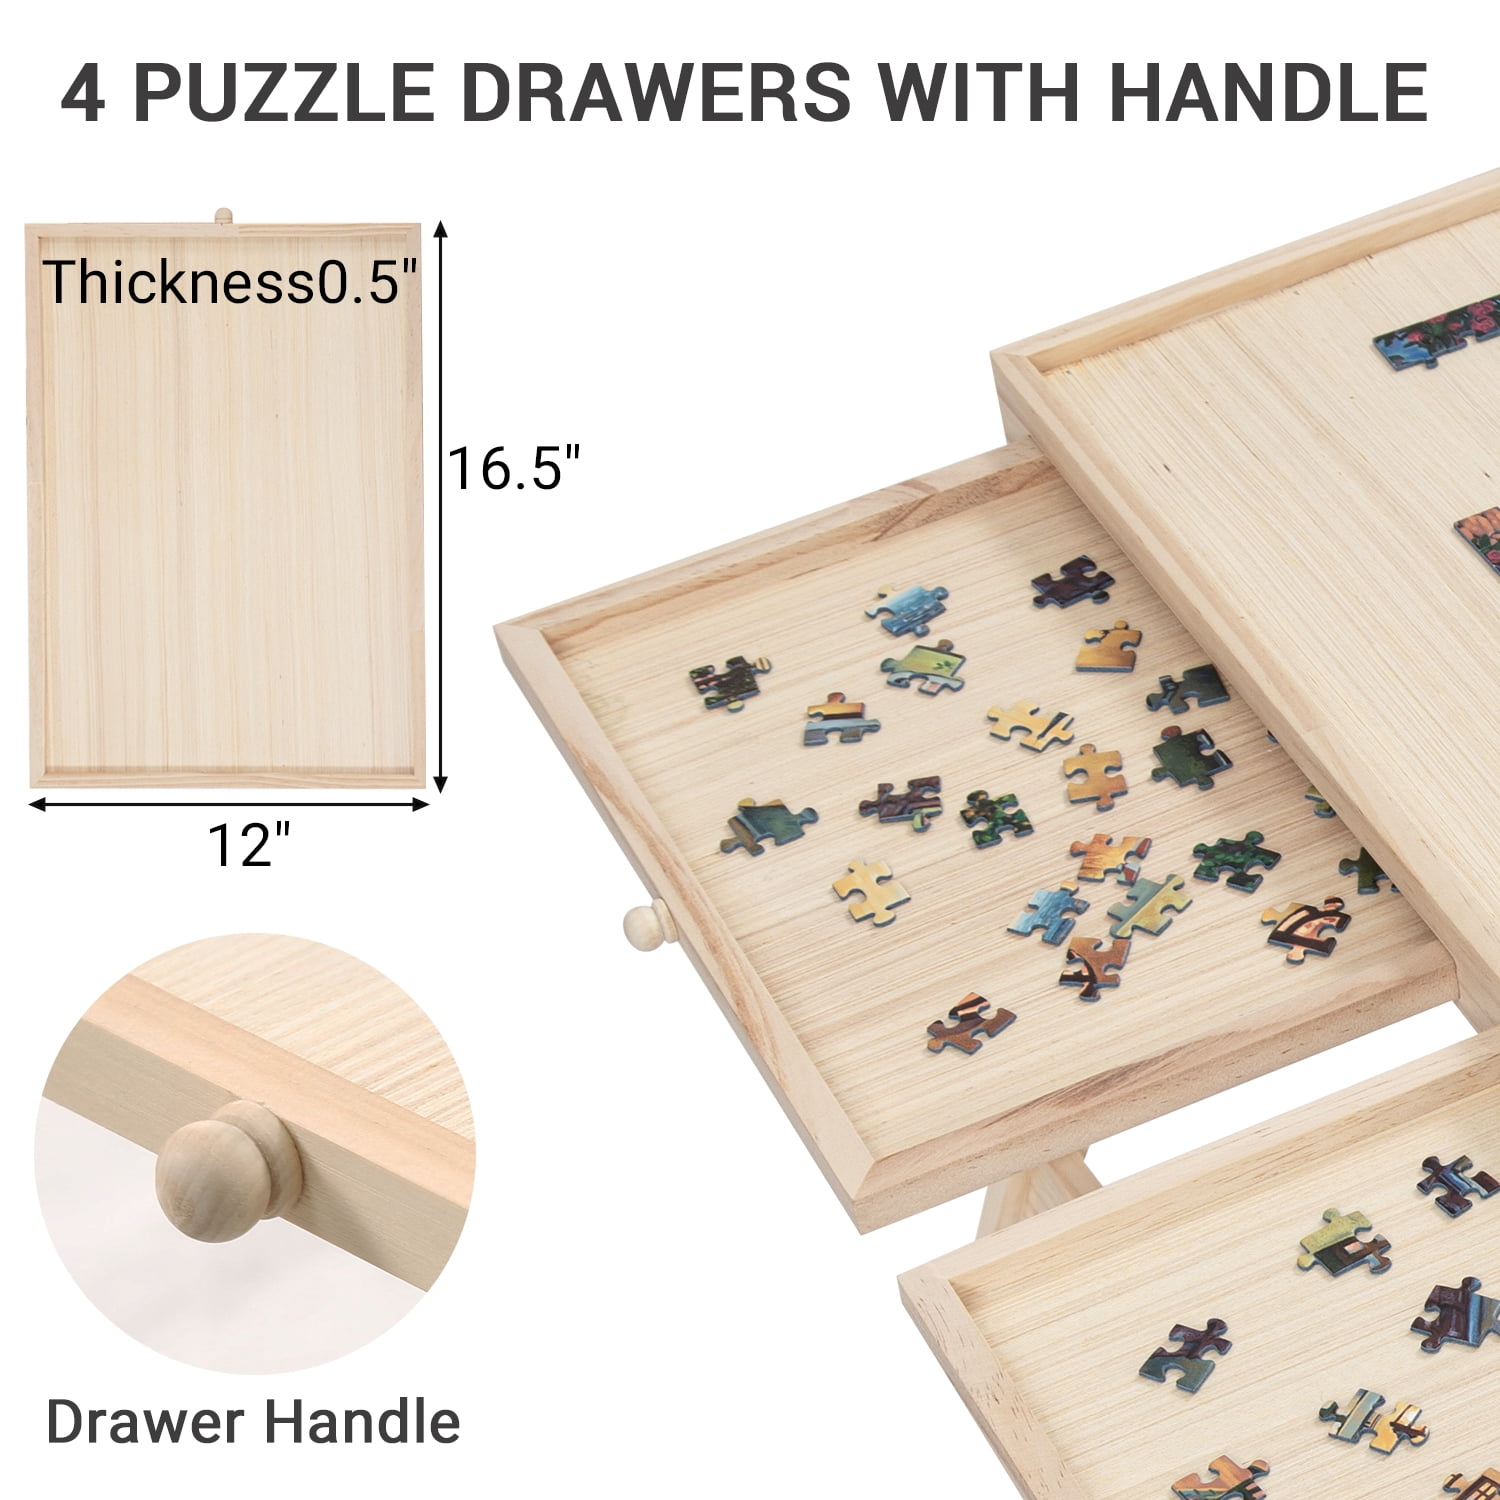 TEAKMAMA 1500 Piece Wooden Jigsaw Folding Puzzle Board, Puzzle Table with  Legs and Protective Cover, 34” X 26.3” Jigsaw Puzzle Board with 4 Drawers 